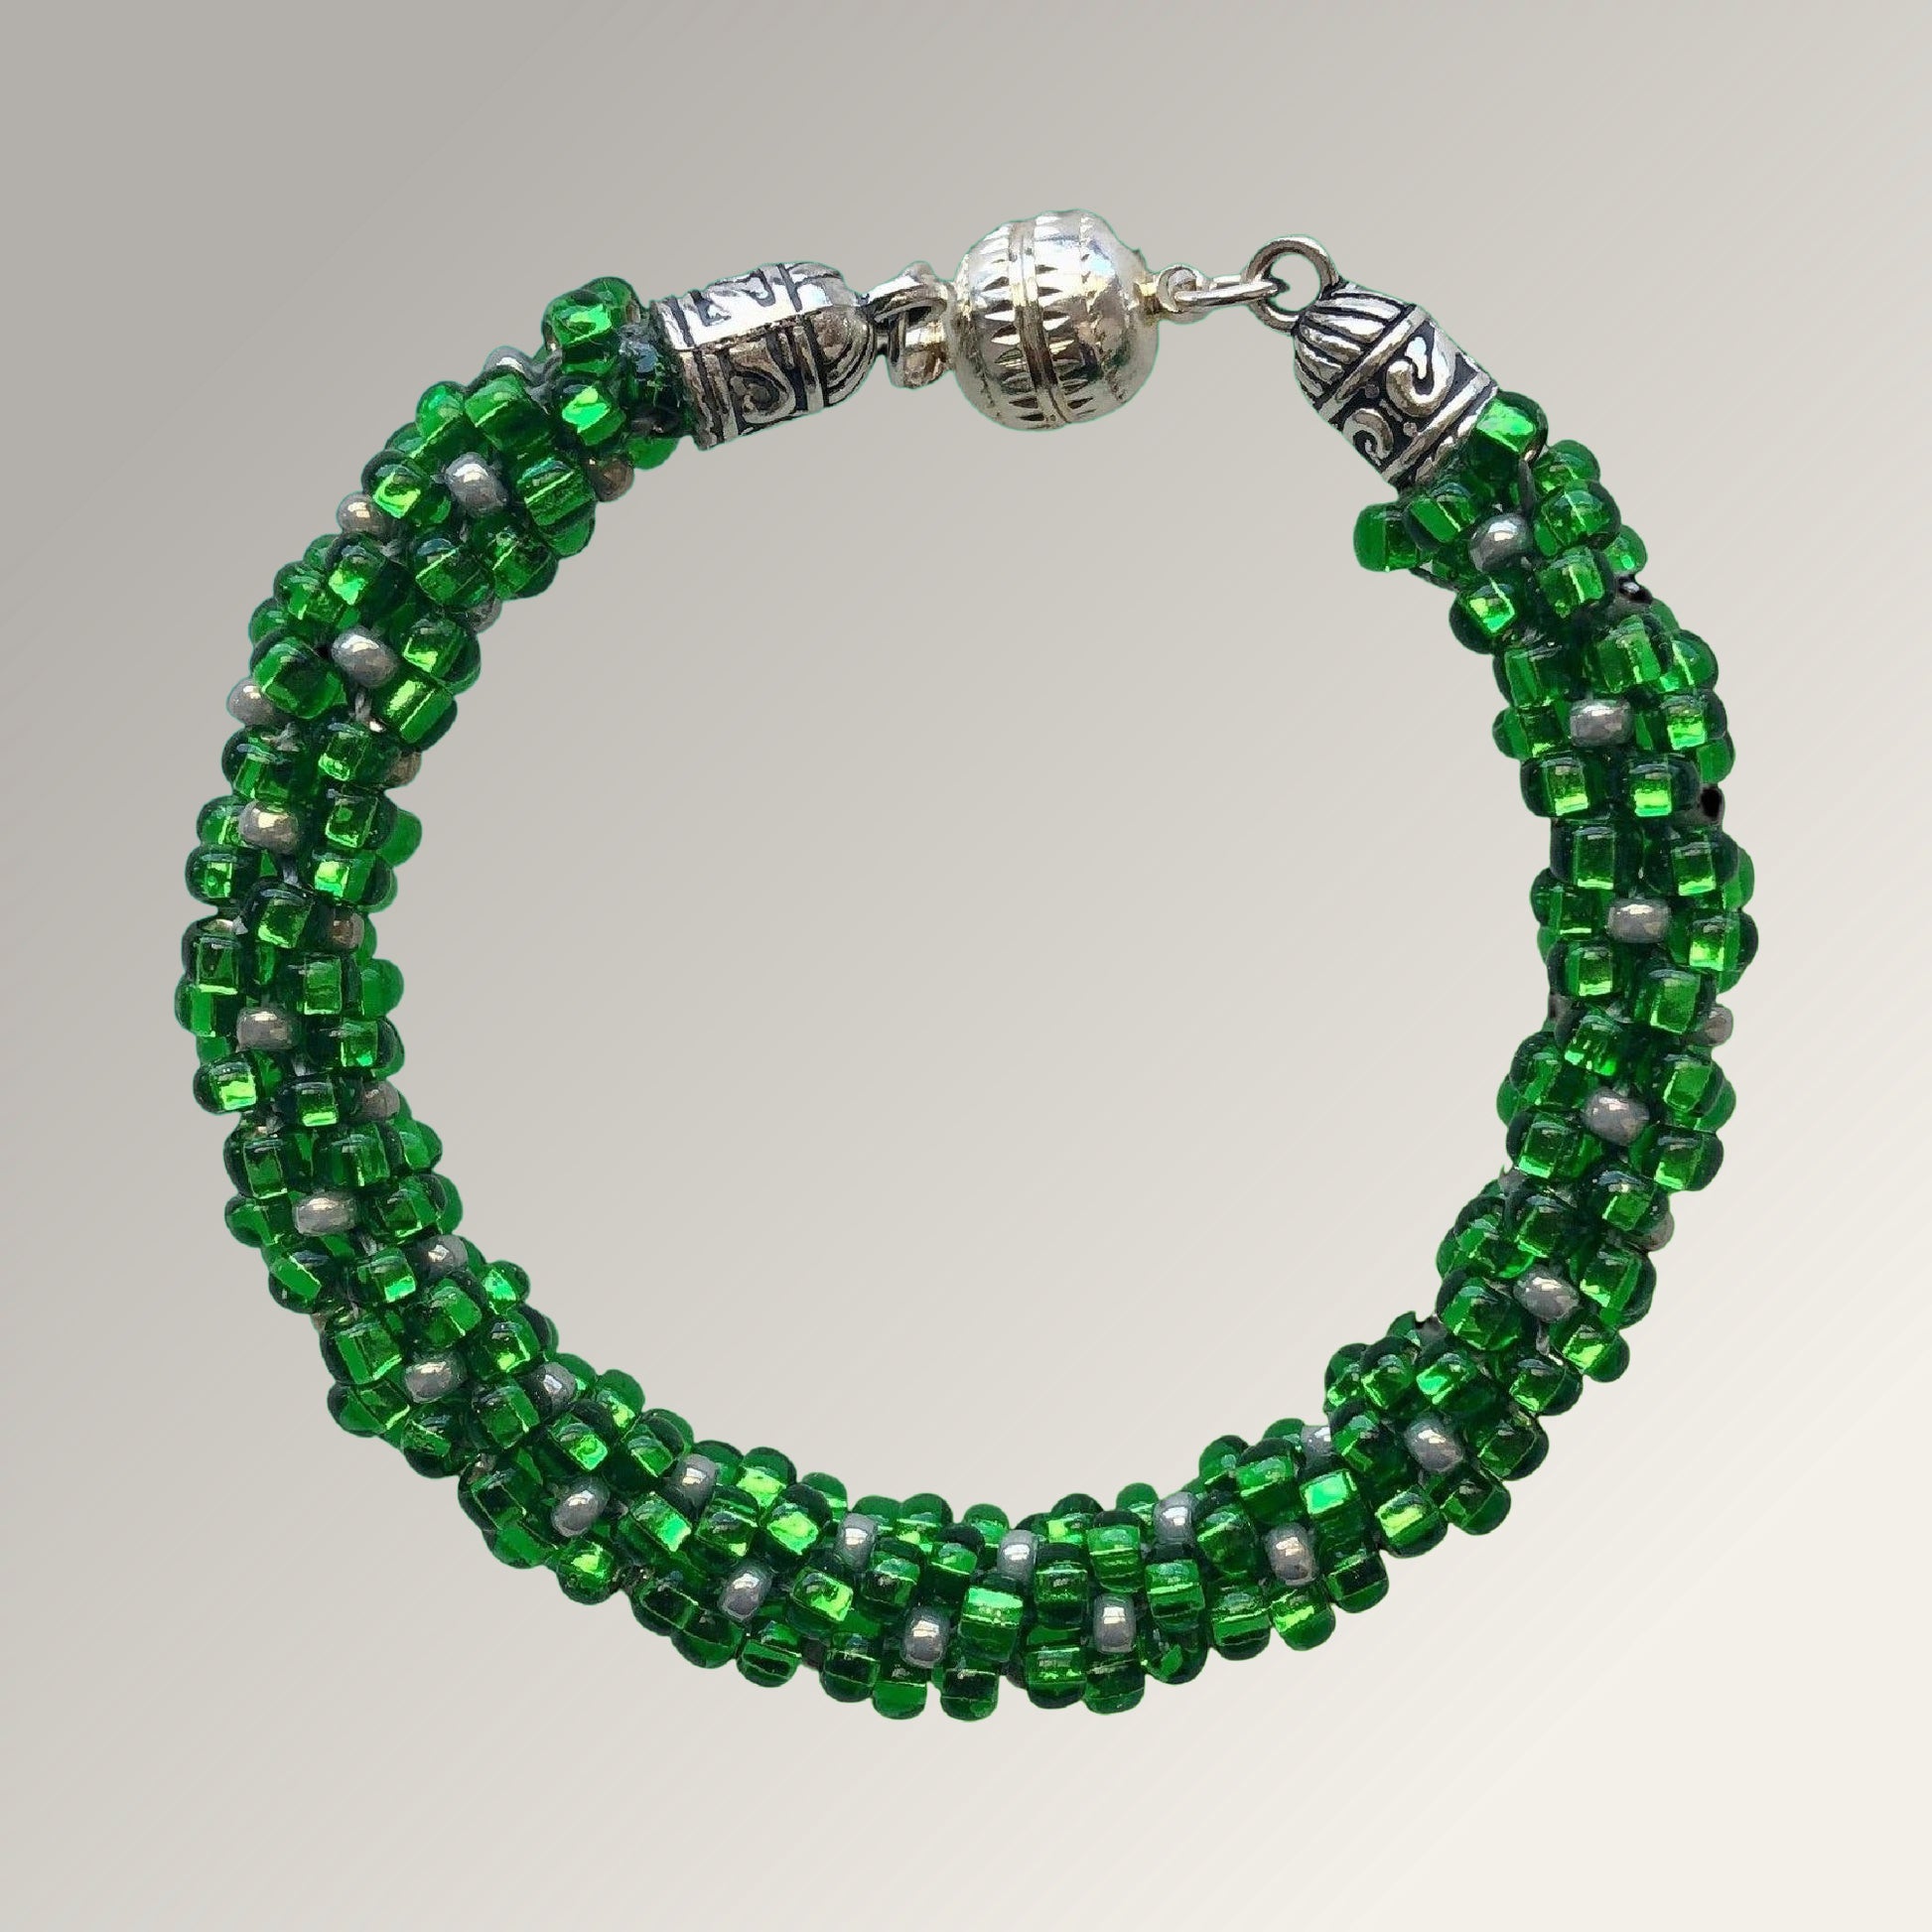 Bright Green Bracelet with magnetic clasp